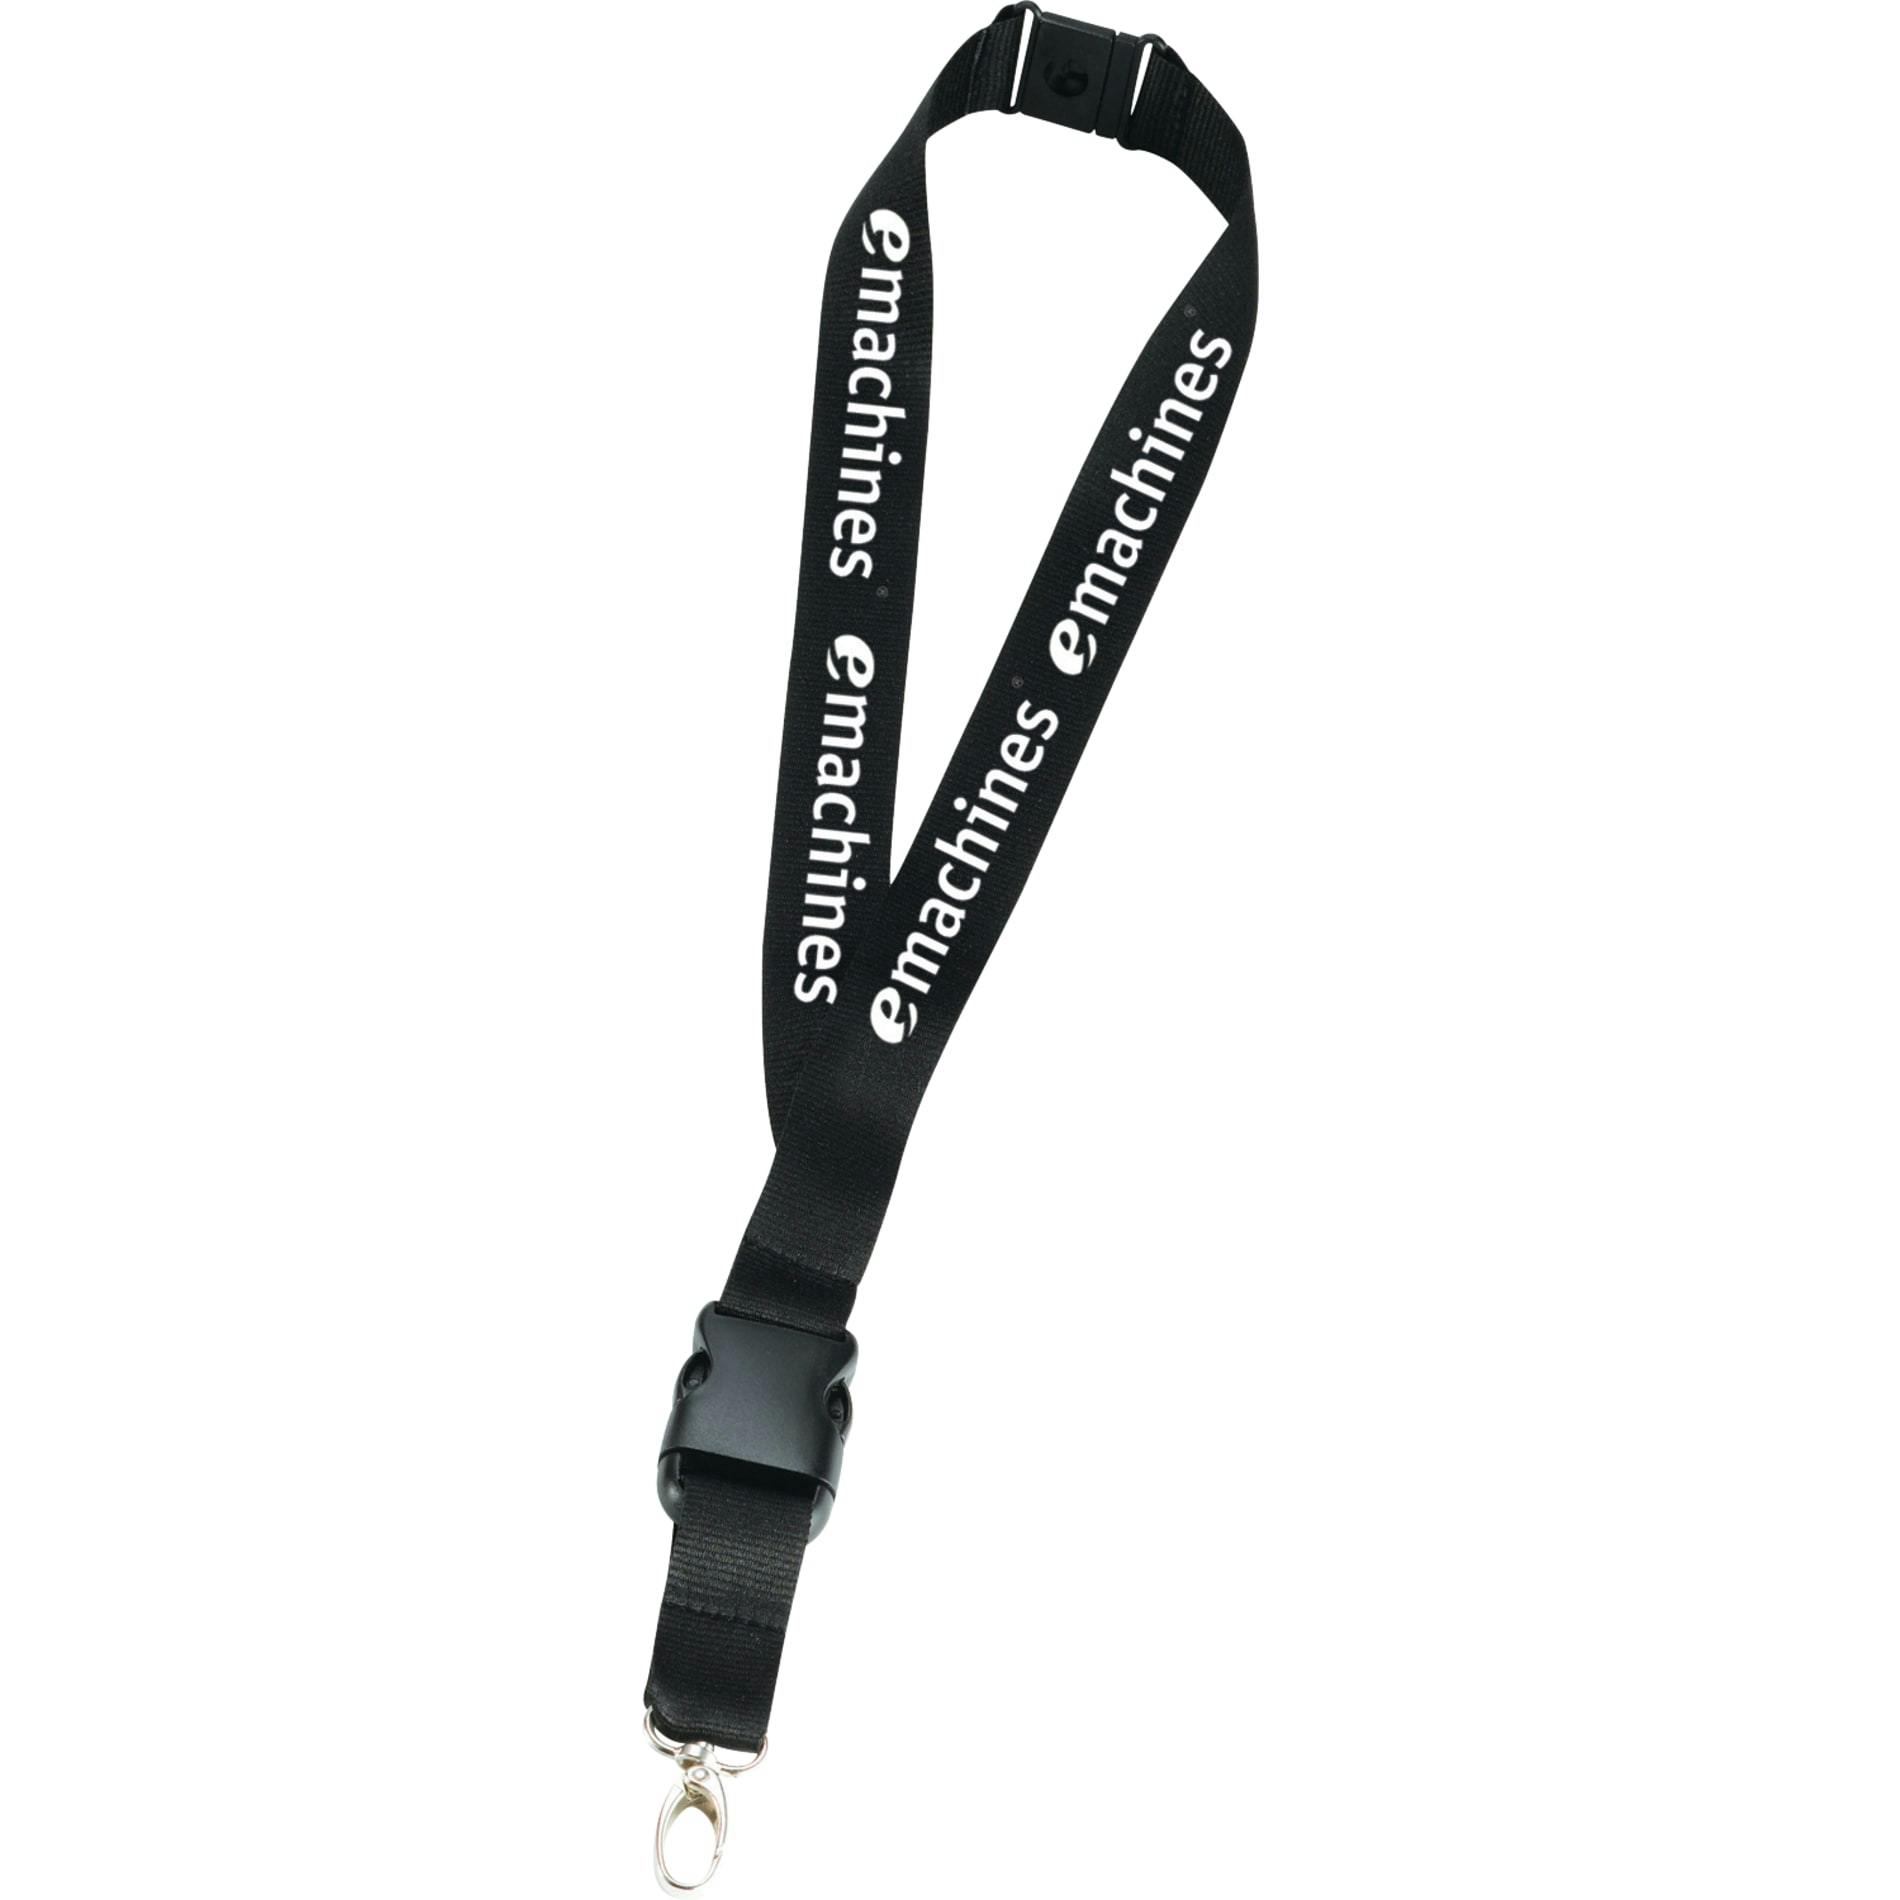 Hang In There Lanyard - additional Image 1